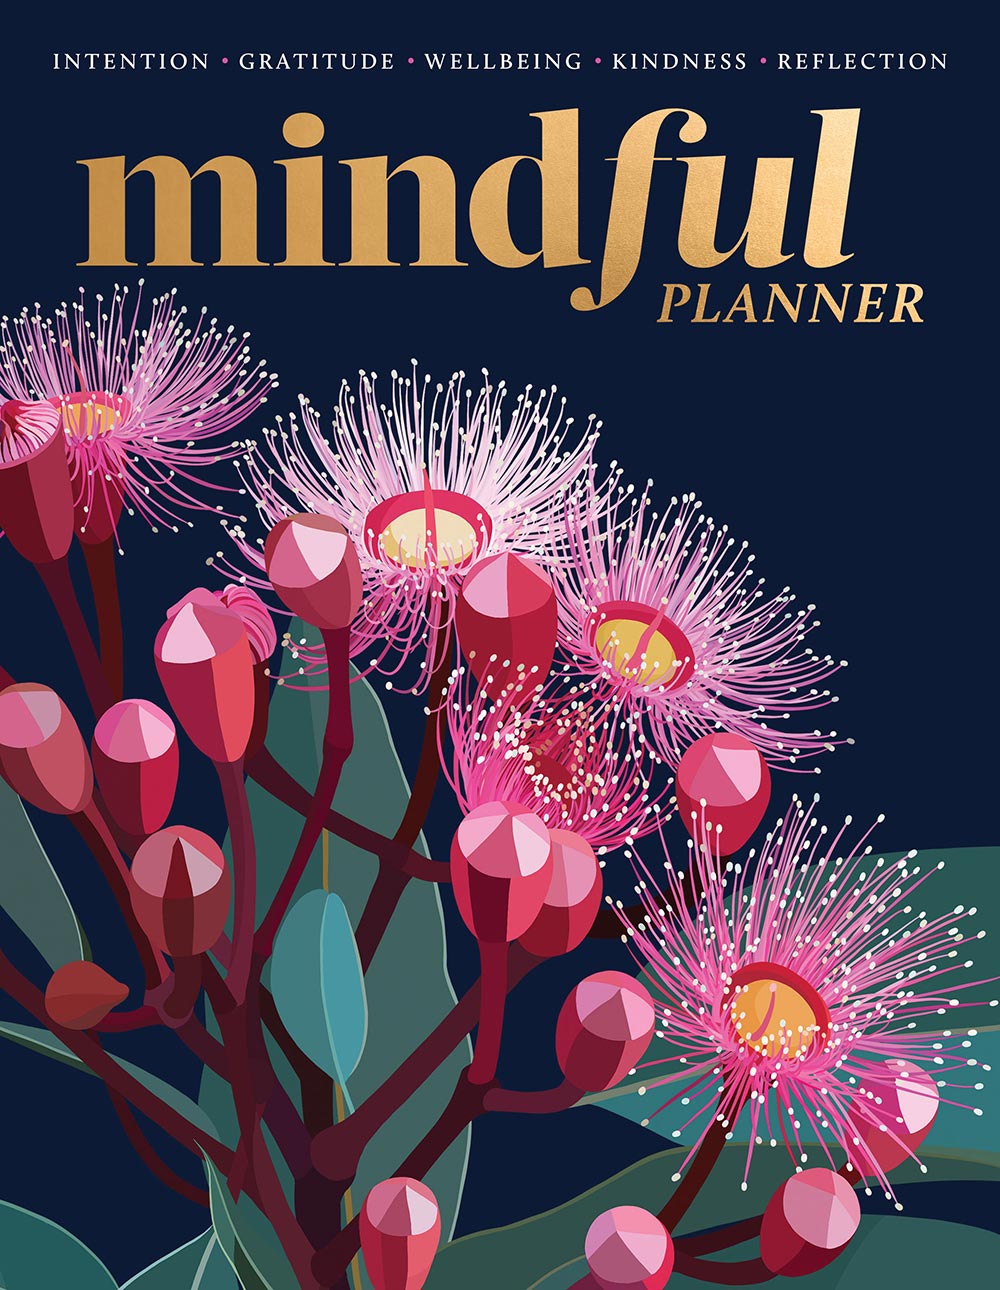 Mindful Planner magazine cover